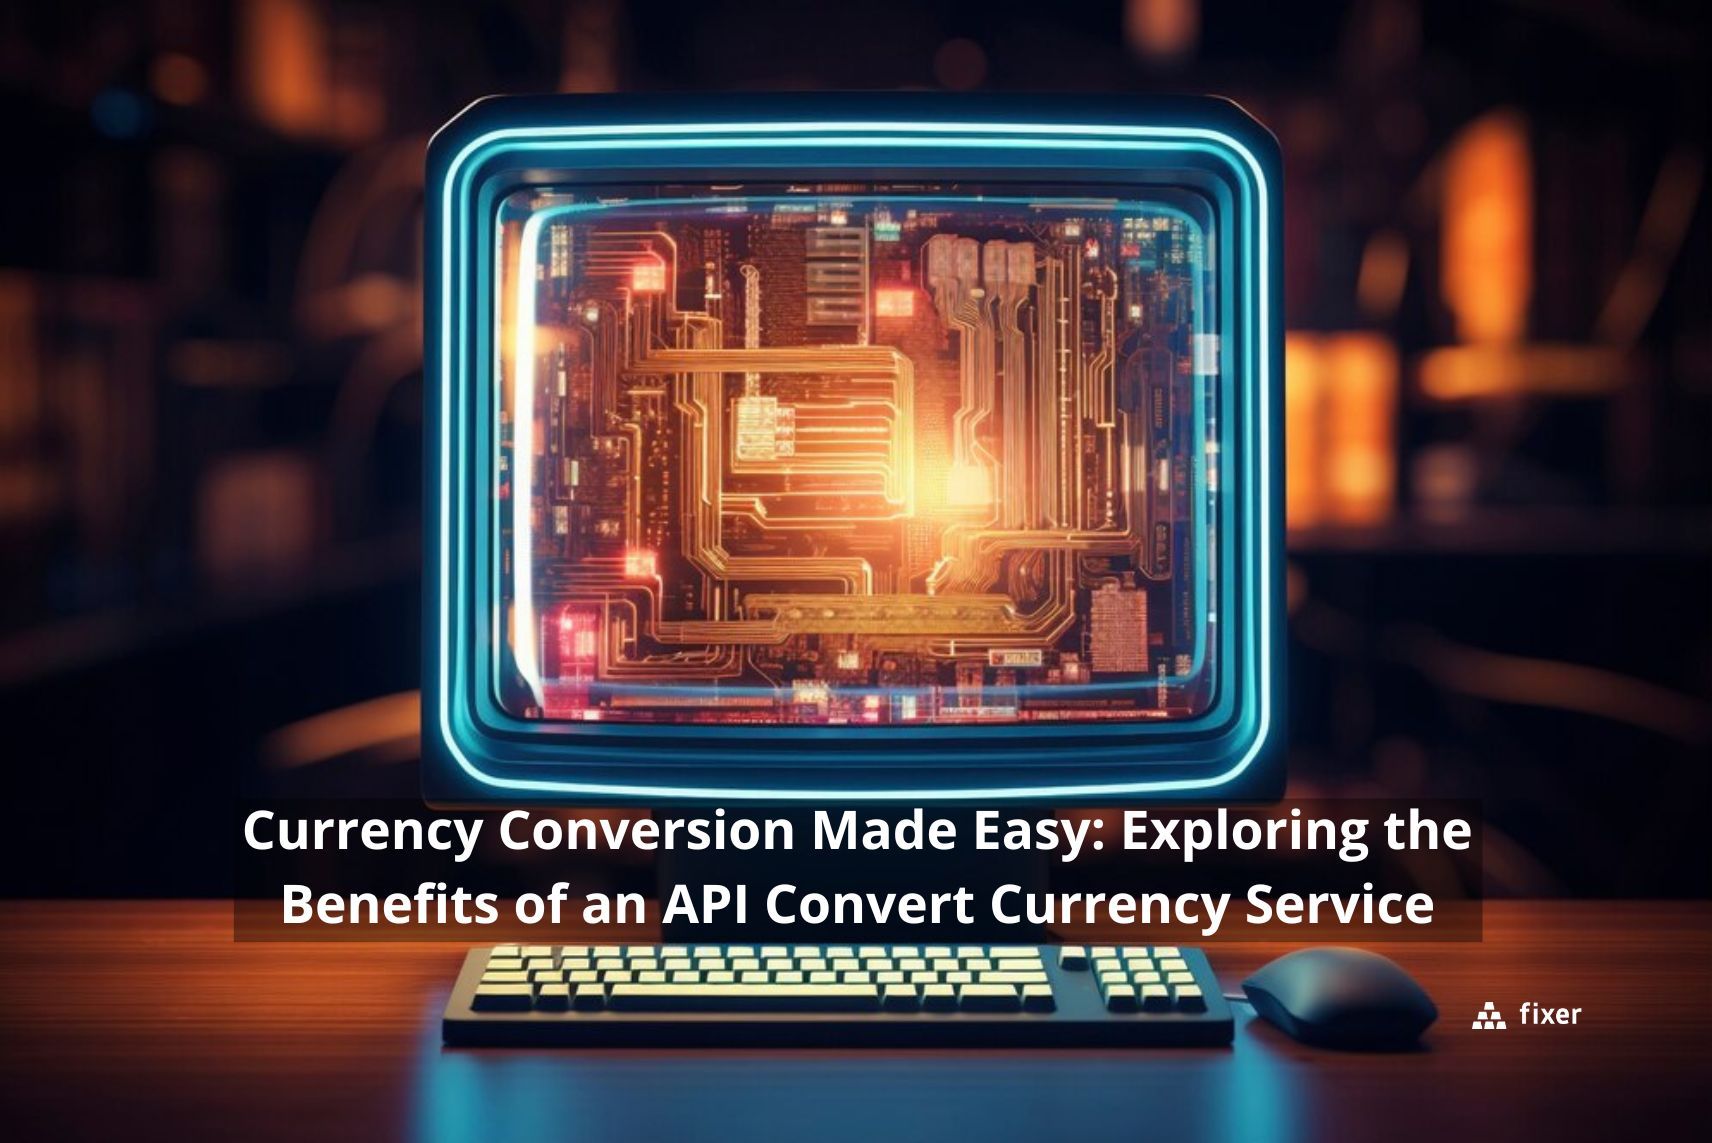 API Convert Currency Service: Simplifying Currency Conversion